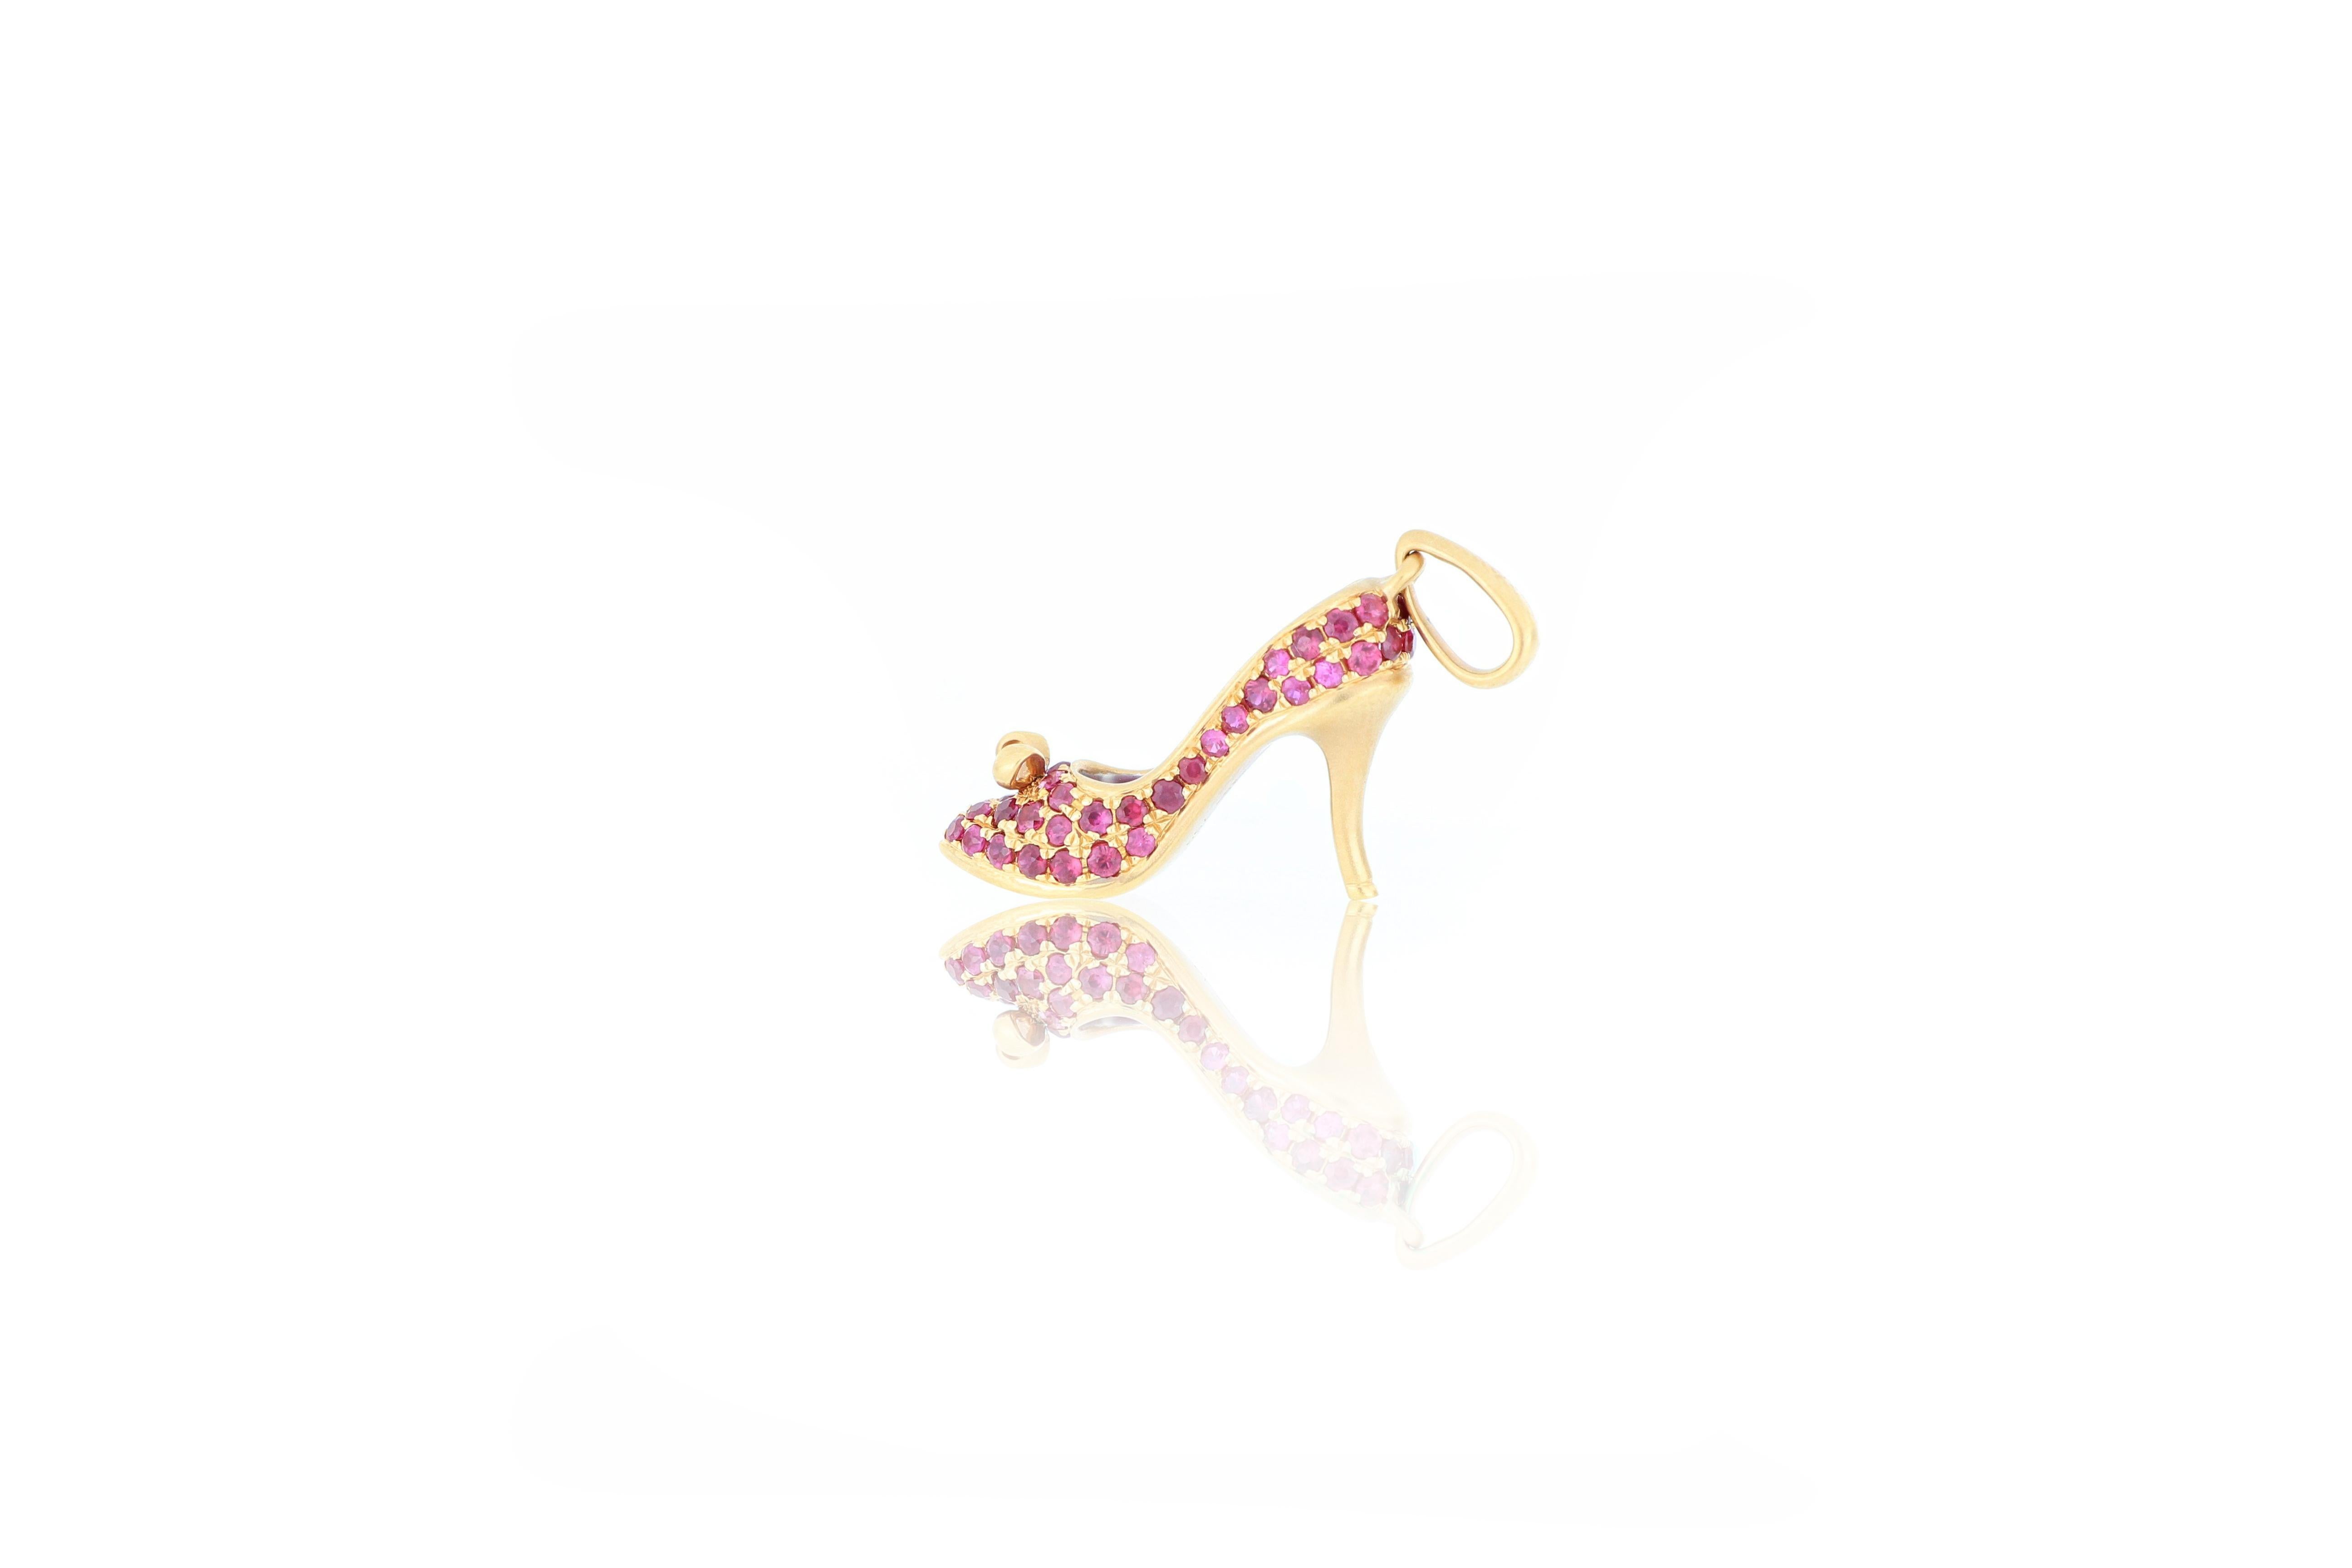 An elegant and very special high heel shoes pendant, set with ruby weighing 0.52 carats, mounted in 18 karat gold. 
O’Che 1867 was founded one and a half centuries ago in Macau. The brand is renowned for its high jewellery collections with fabulous